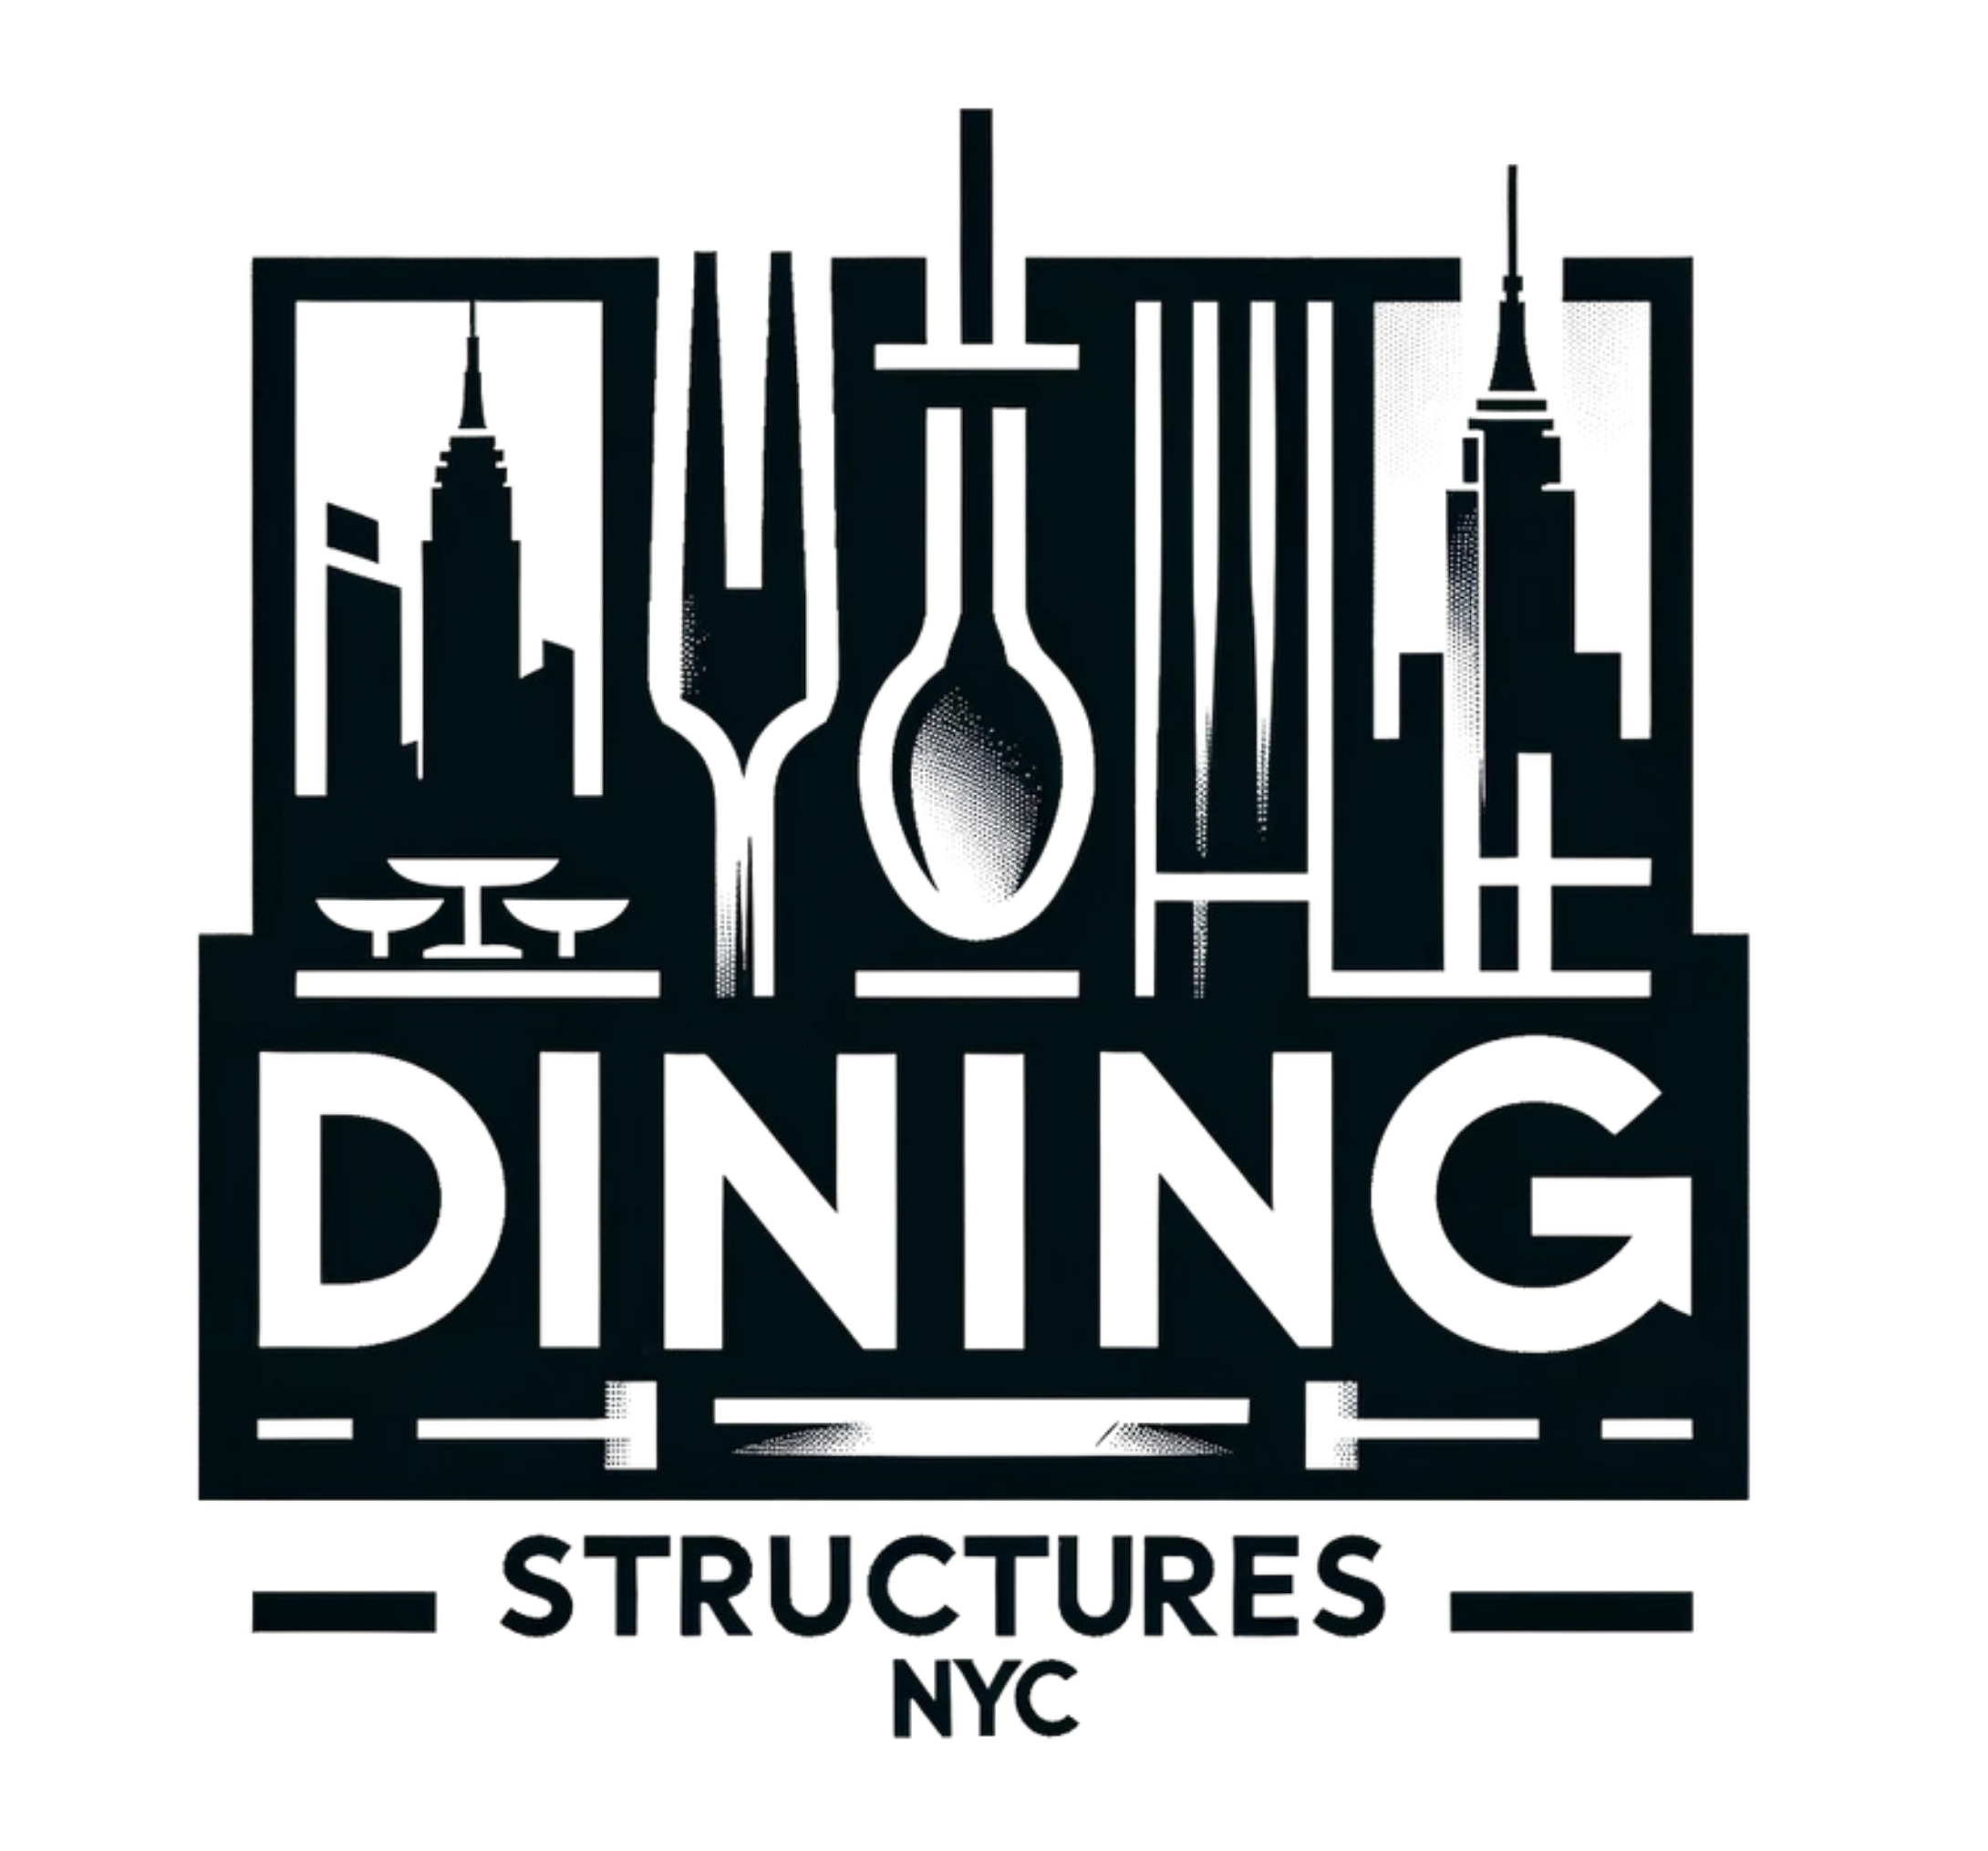 DINING STRUCTURES NYC